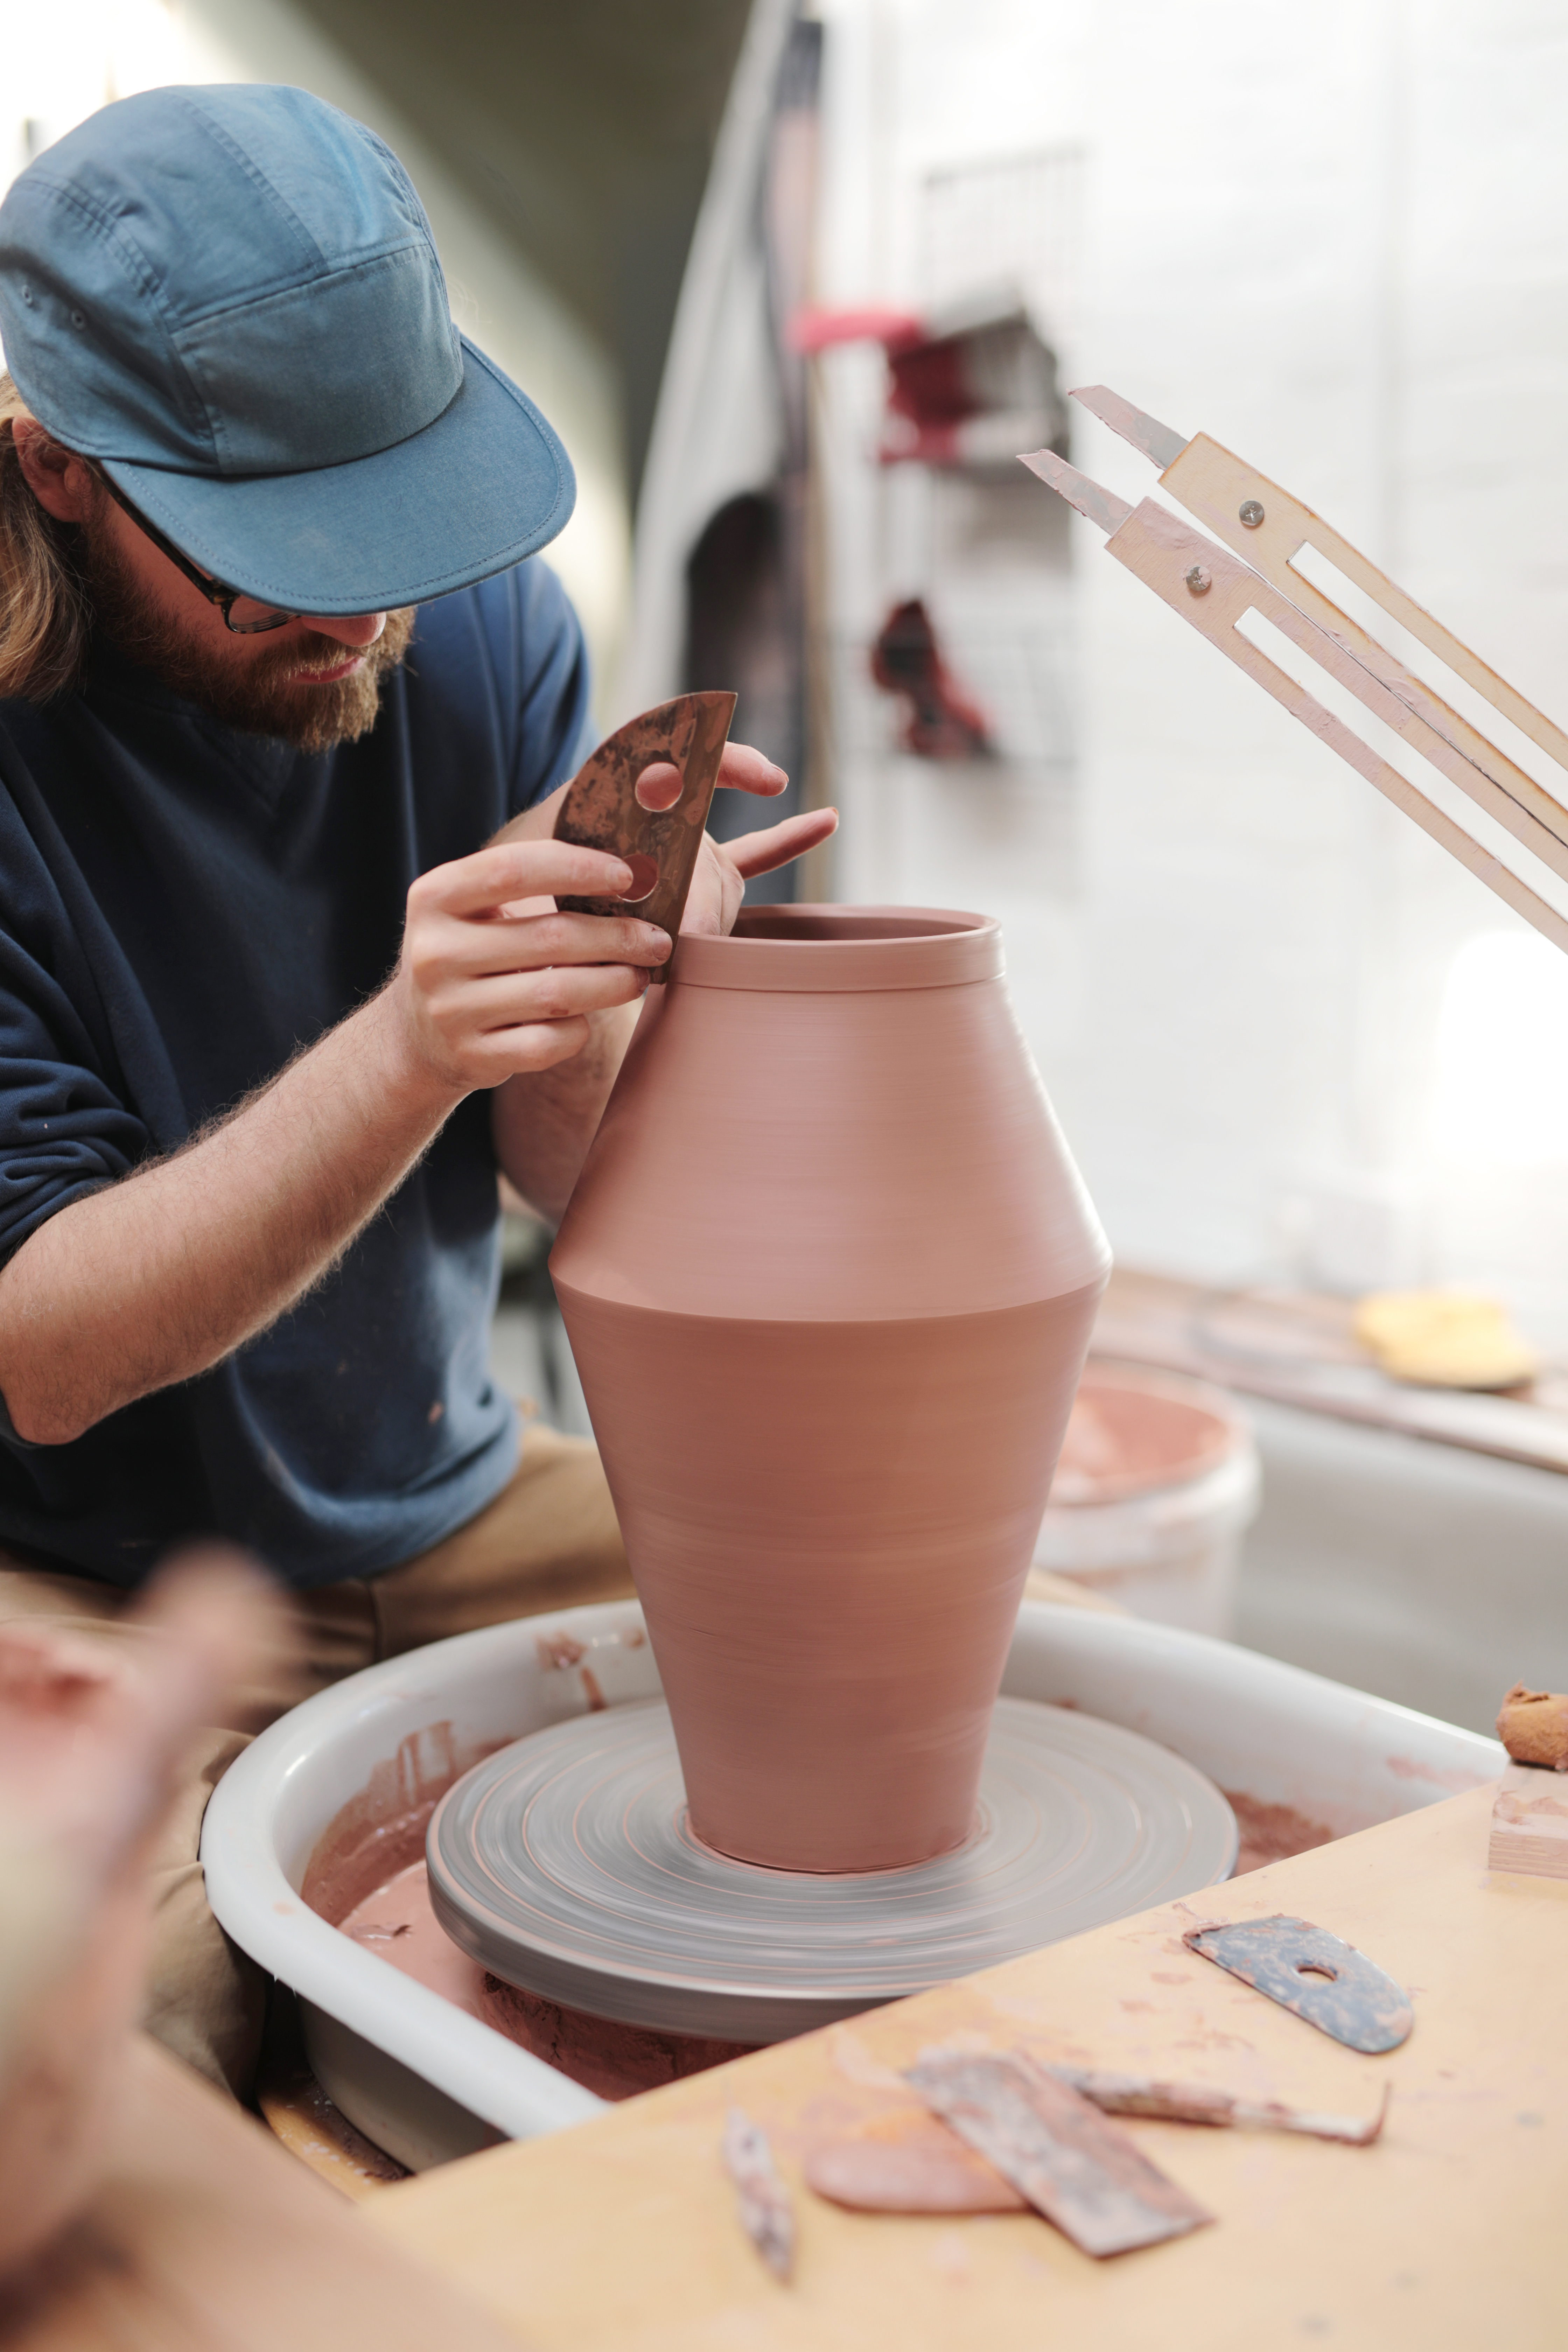 A man wearing a blue cap, trimming the rim of a large pot on a potter's wheel.